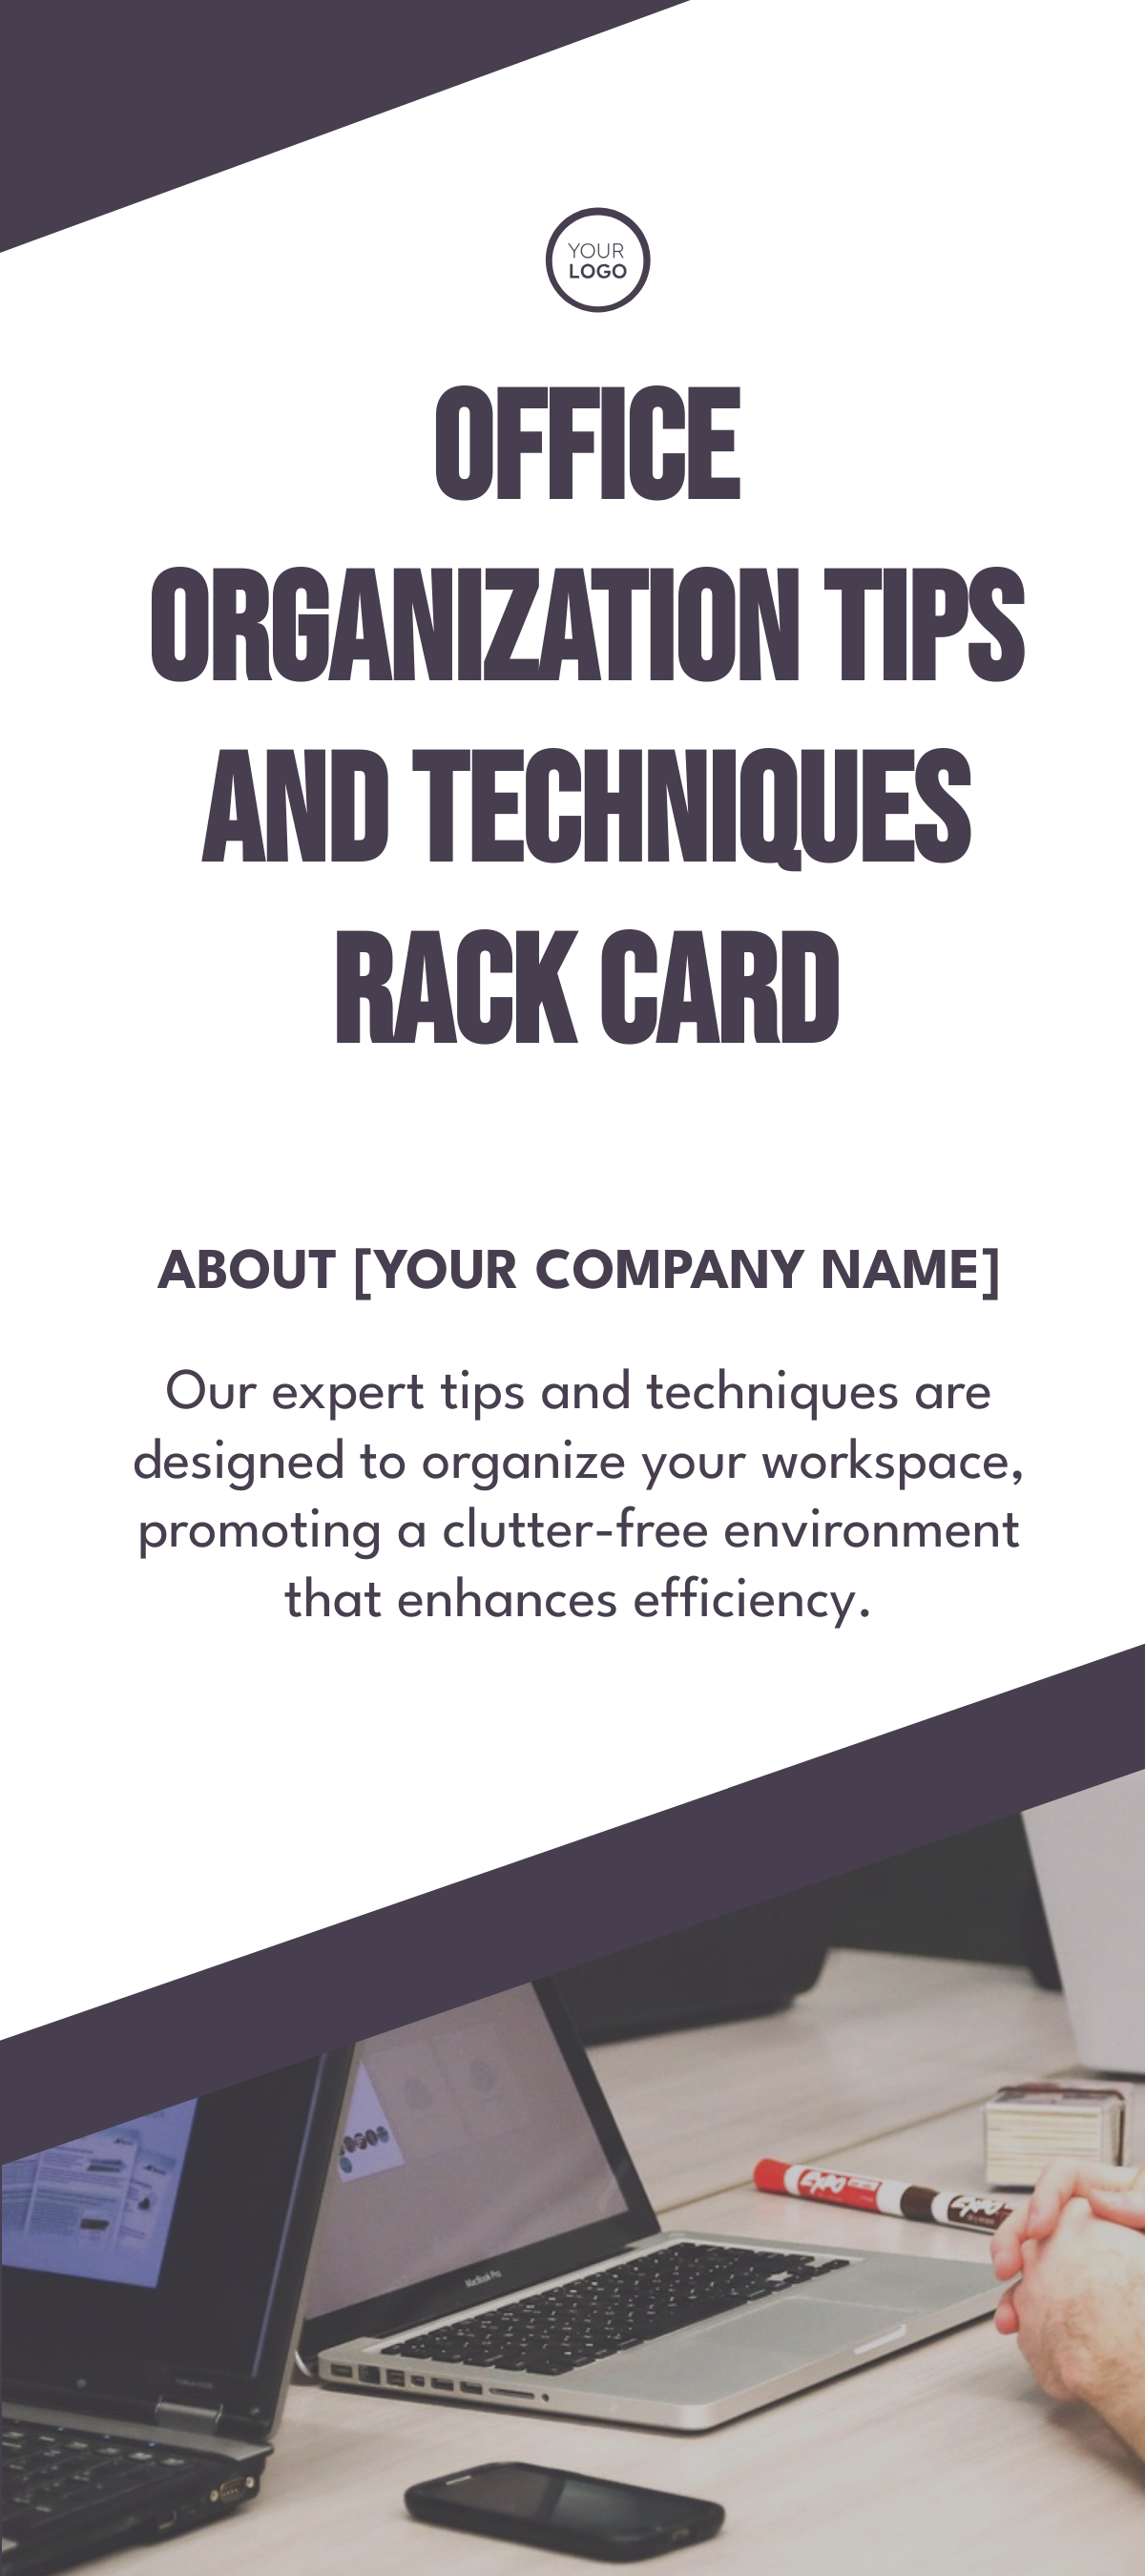 Free Office Organization Tips and Techniques Rack Card Template